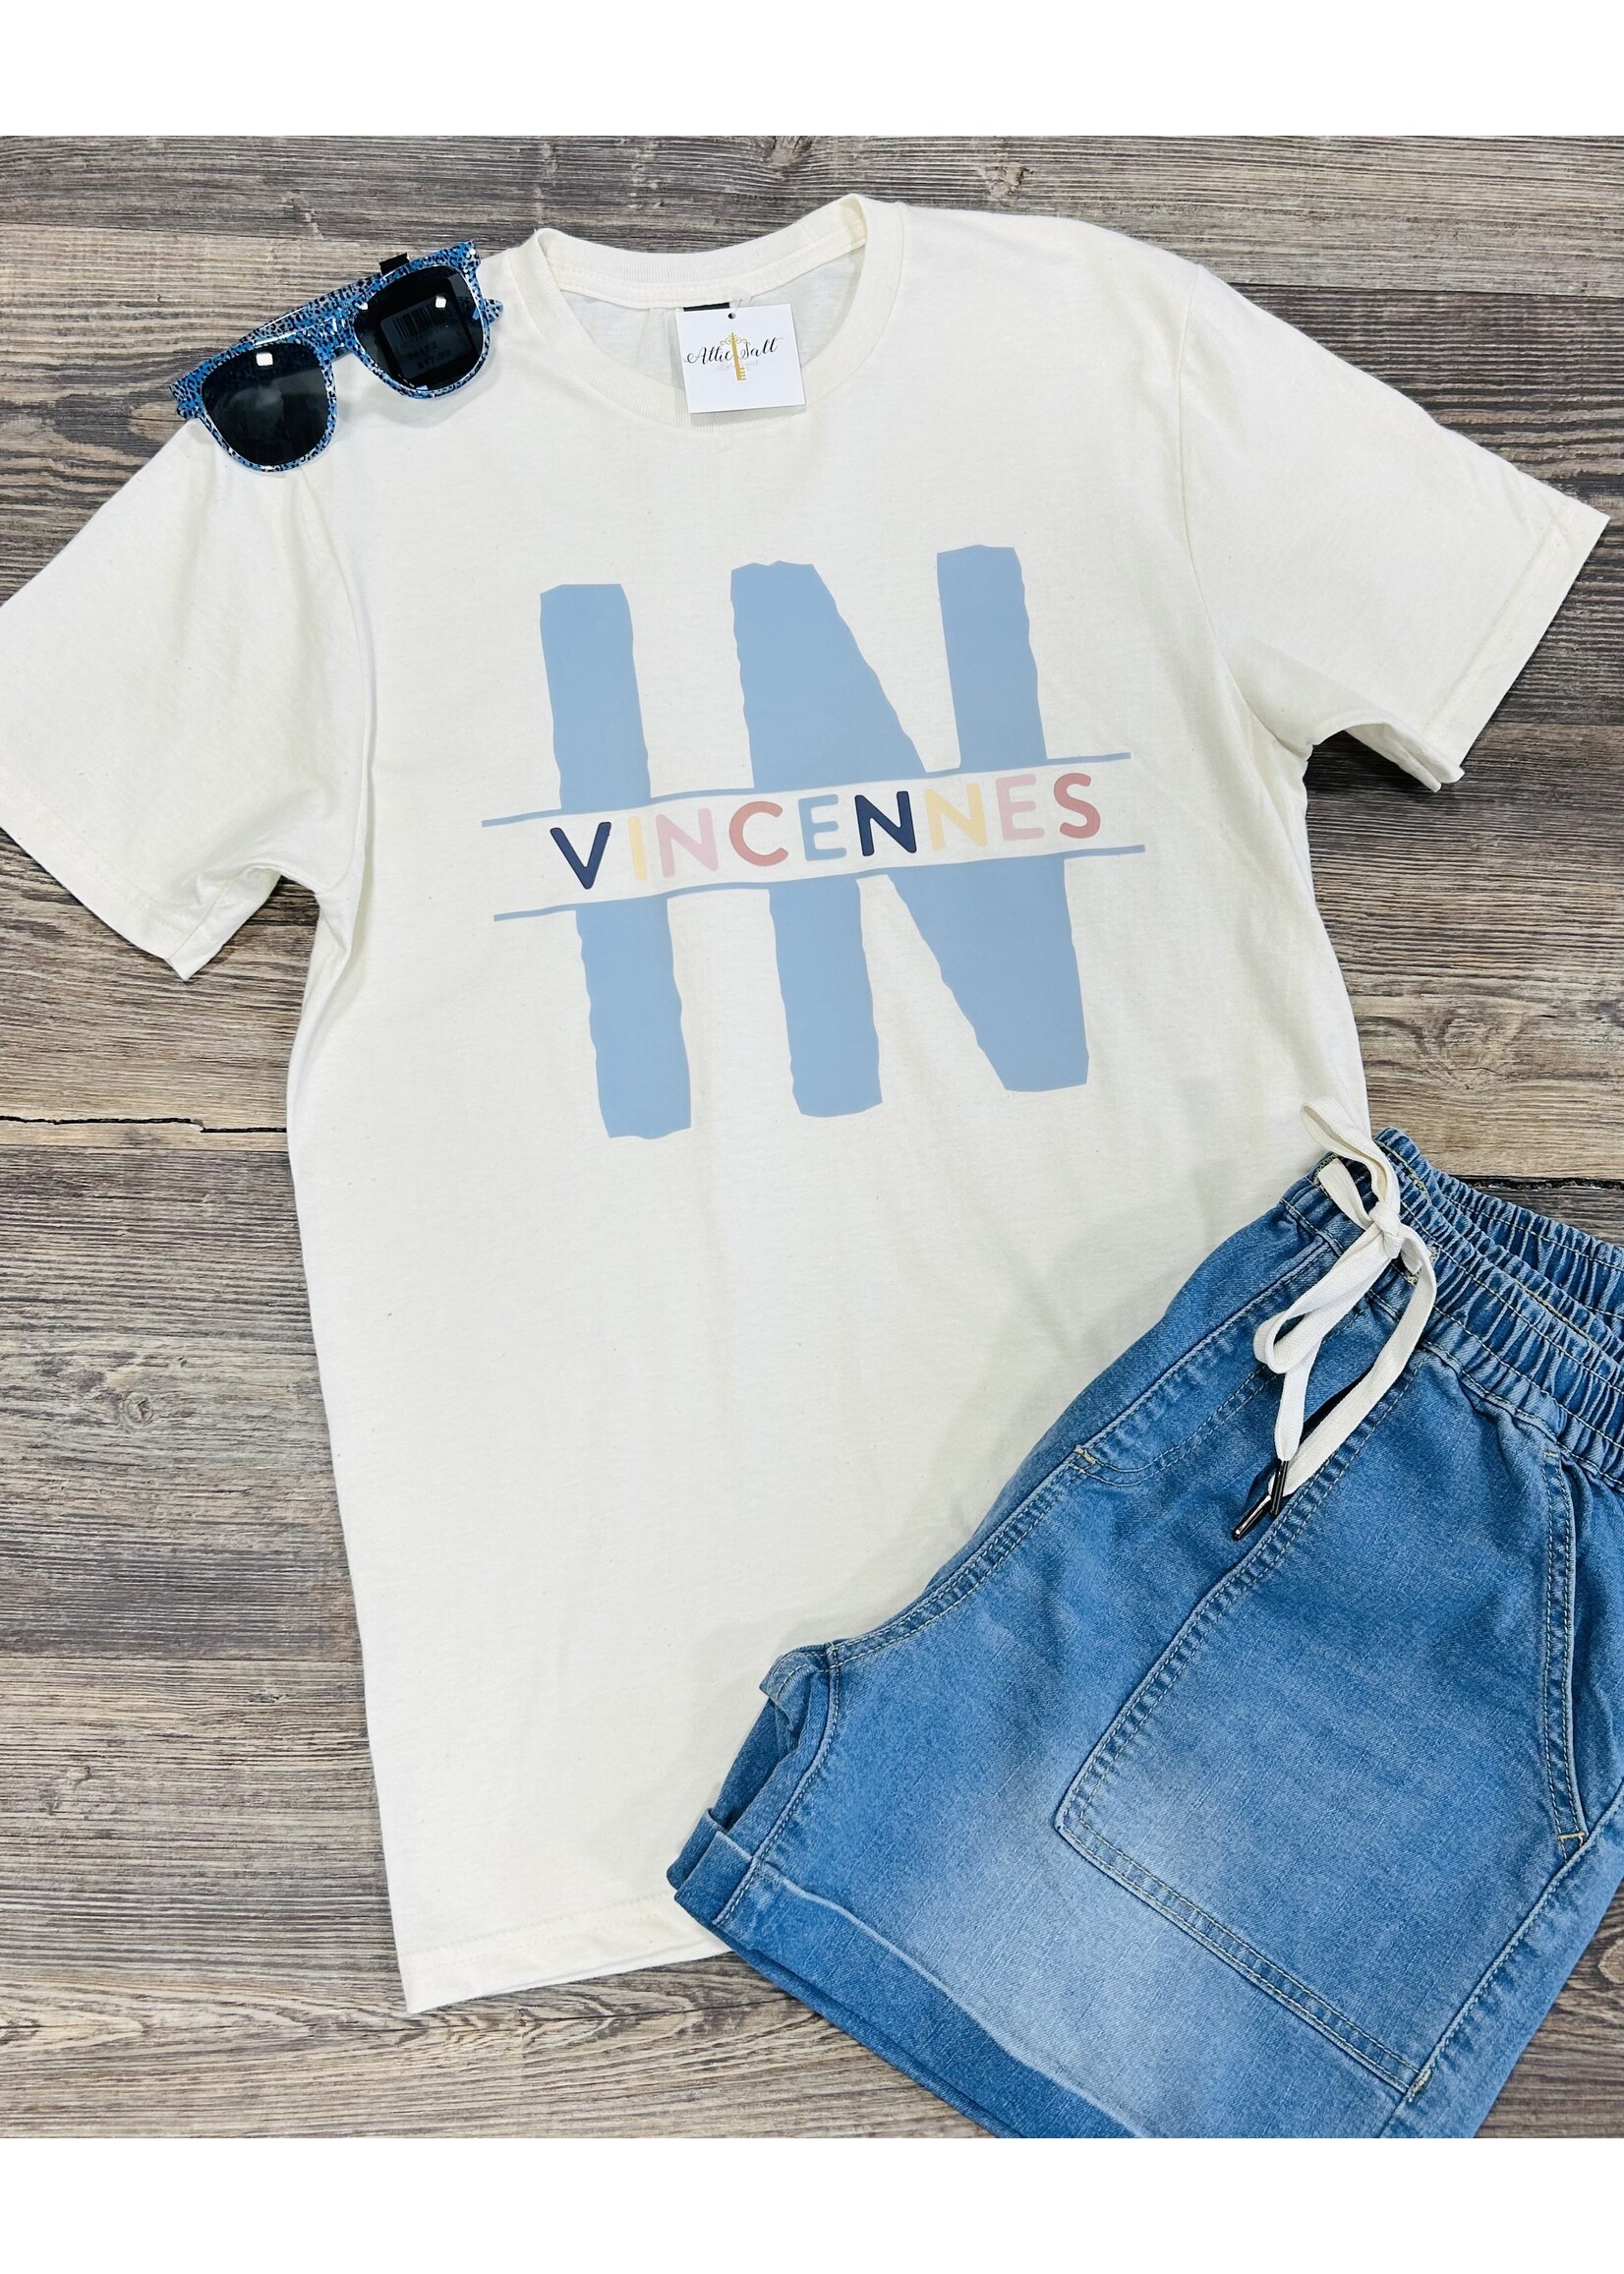 Vincennes, IN Graphic Tee